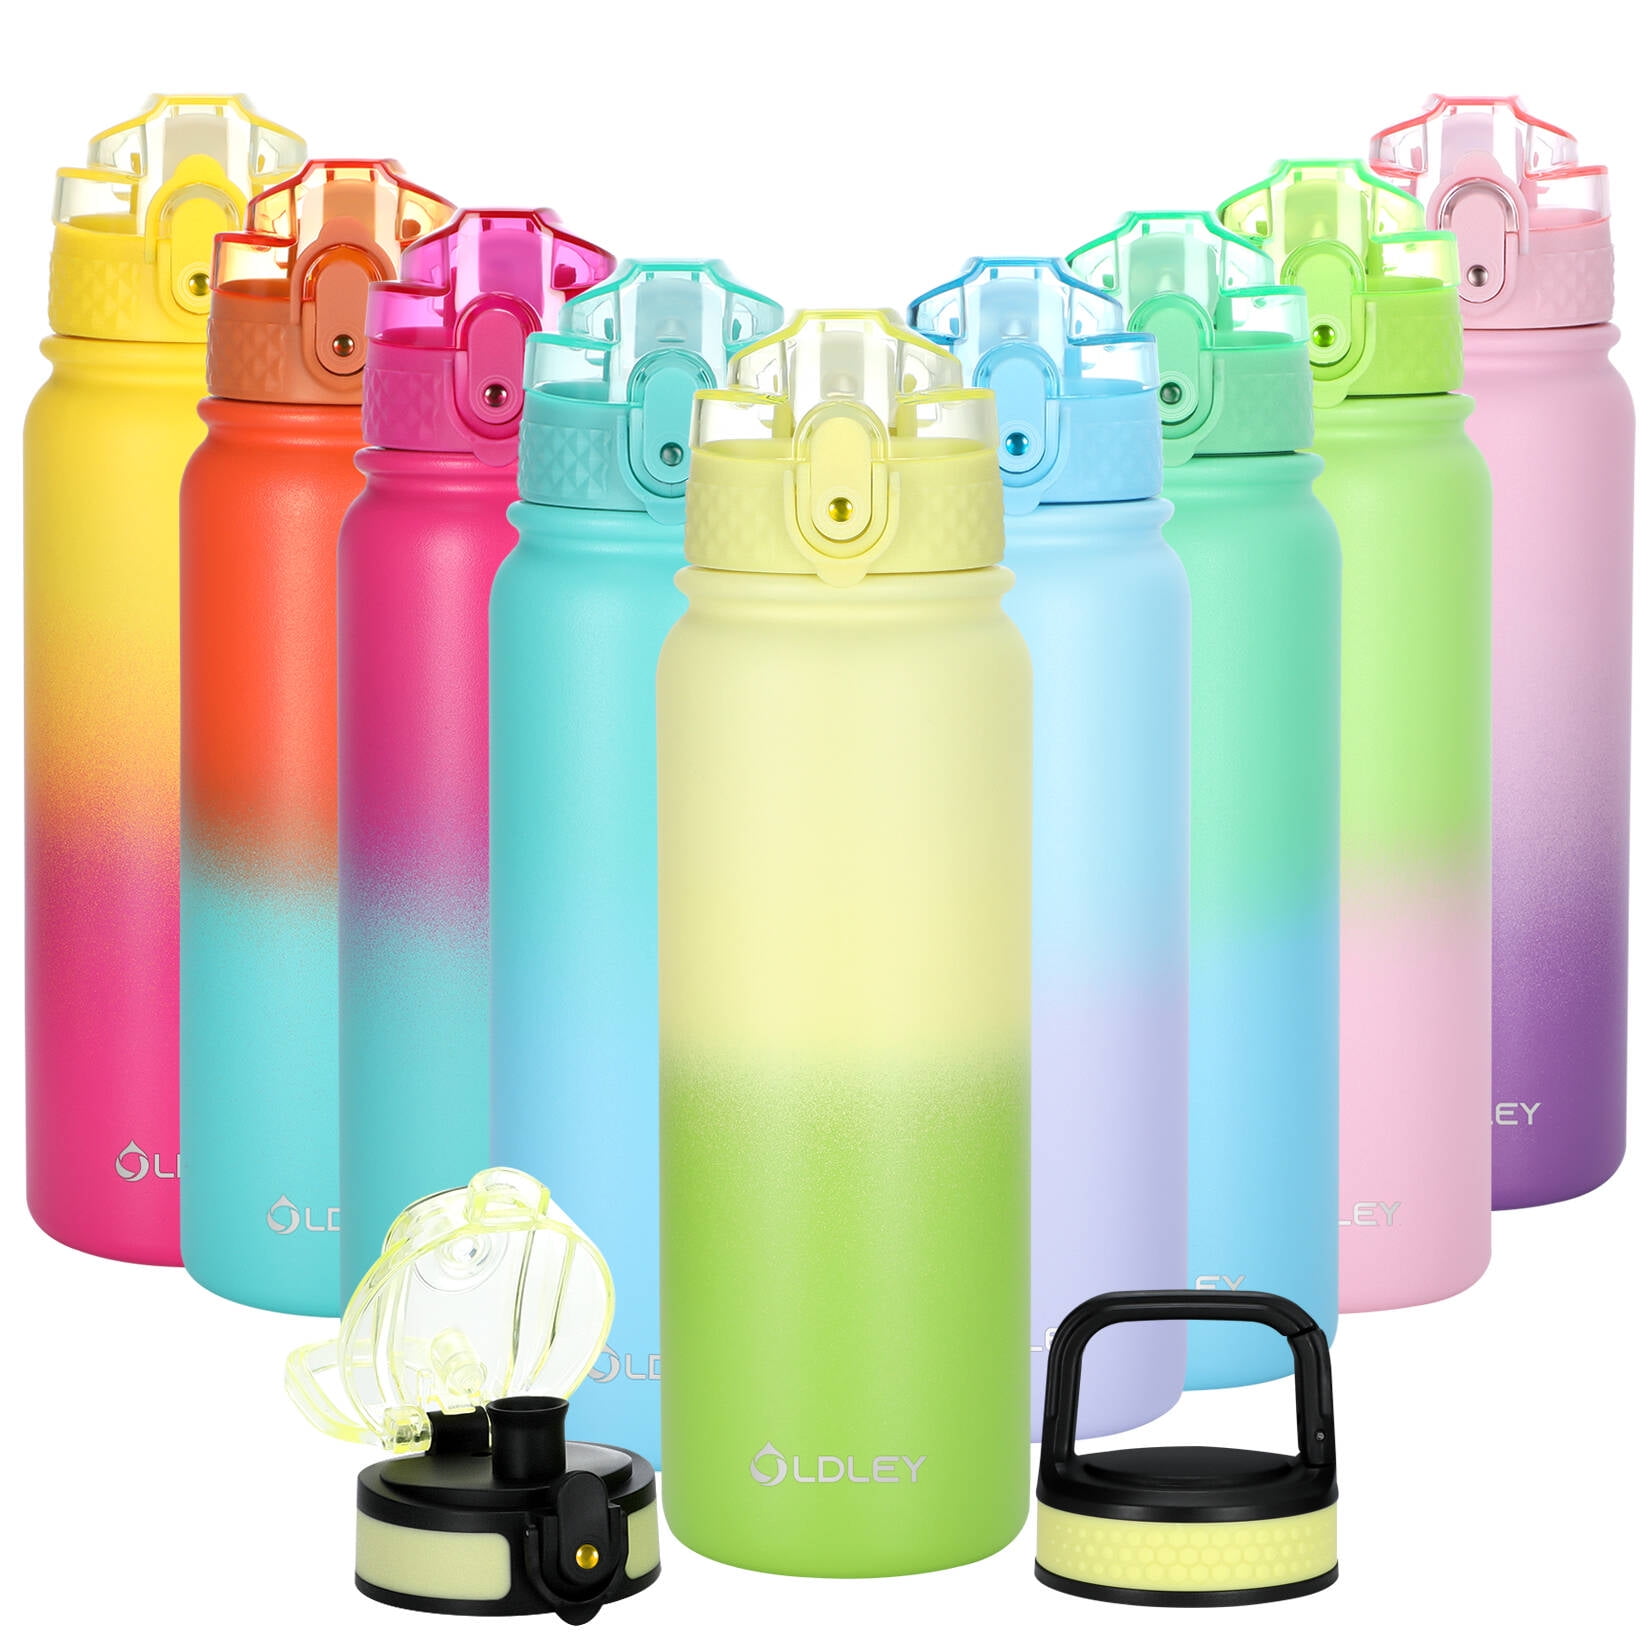 20 oz Kids Water Bottle with Straw/Chug/Wide Mouth For Girs  Boys/Blue,Pink,Green/Stainless Steel Double Wall Vacuum Insulated  One-Click-Open/Carabiner